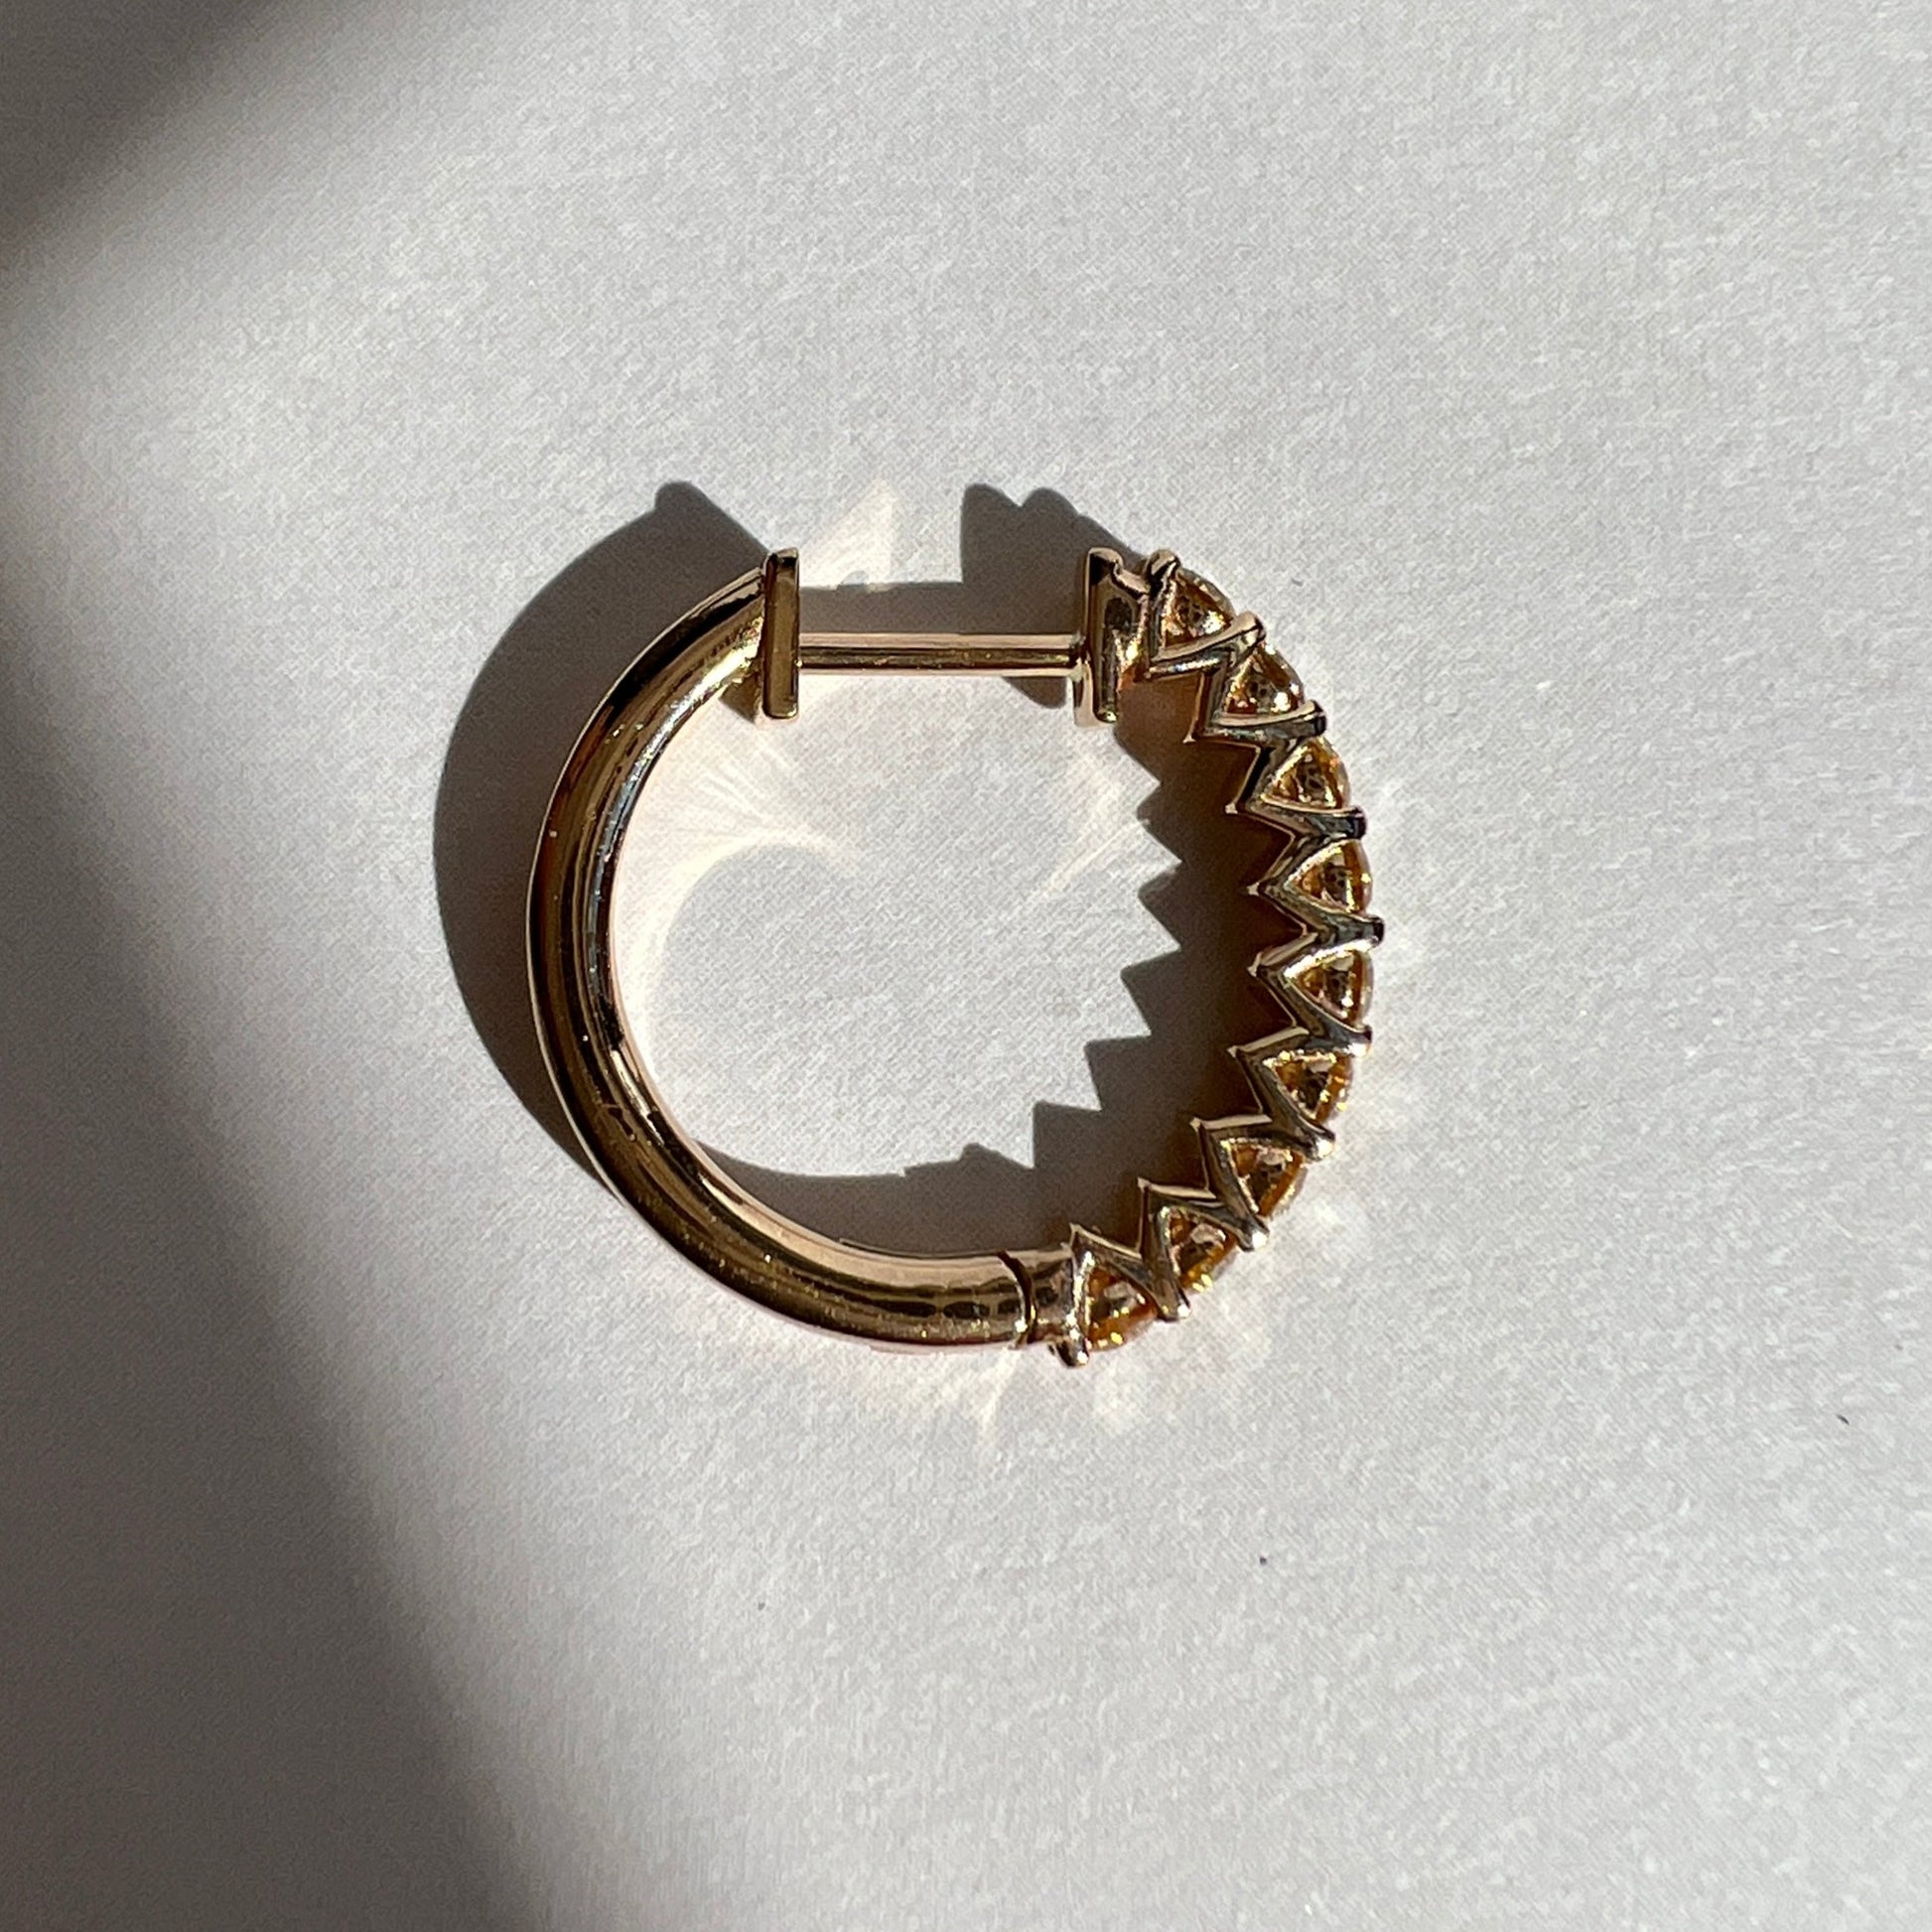 HOOP EARRING "ARCHES" WITH ROYAL YELLOW DIAMONDS / SOLID GOLD